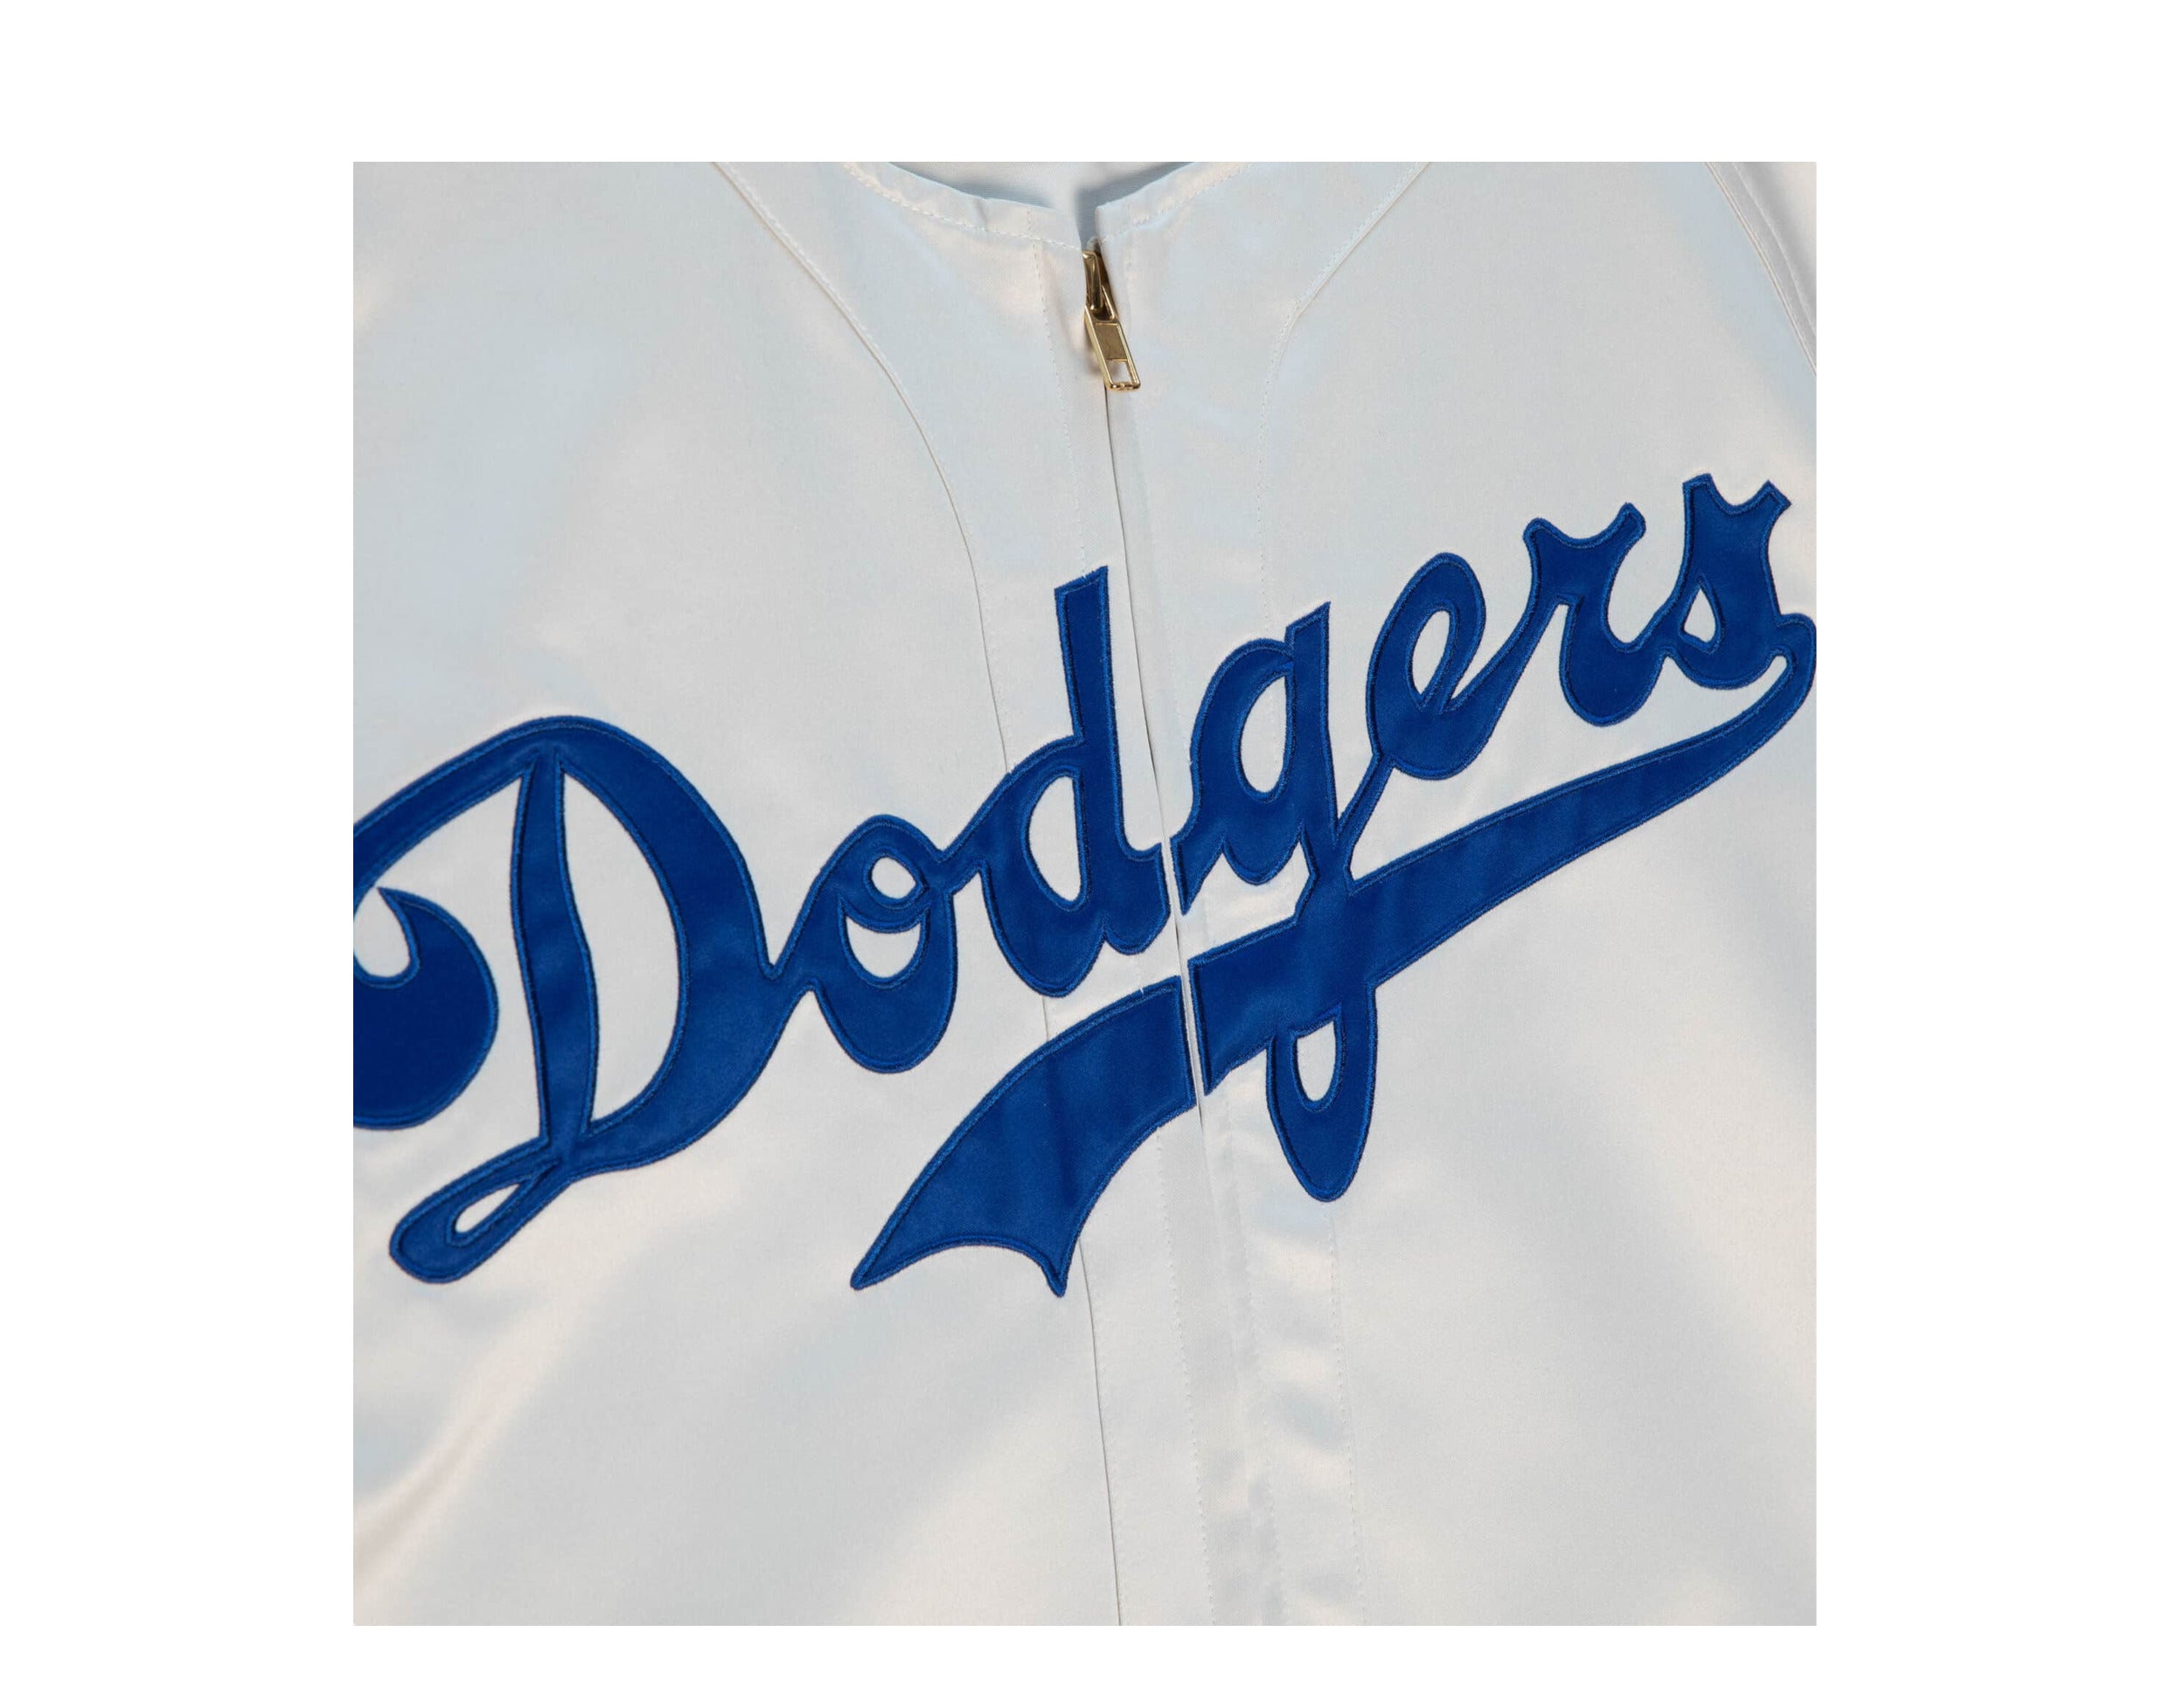 Jackie Robinson Brooklyn Dodgers Mitchell & Ness Authentic Jersey